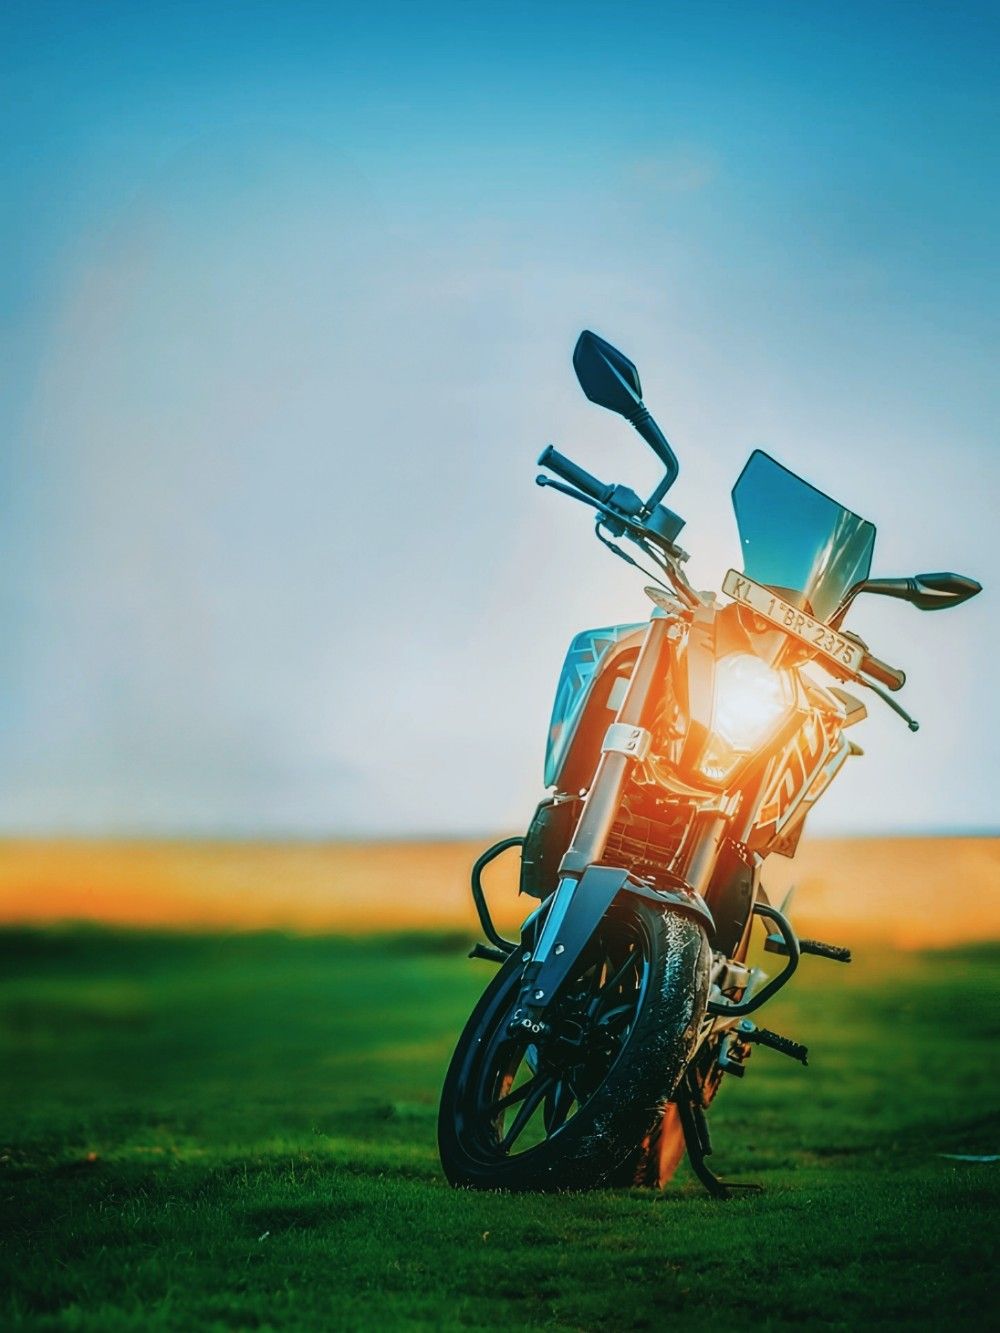 Download Bike Picsart Backgrounds In HD - Free Of Cost